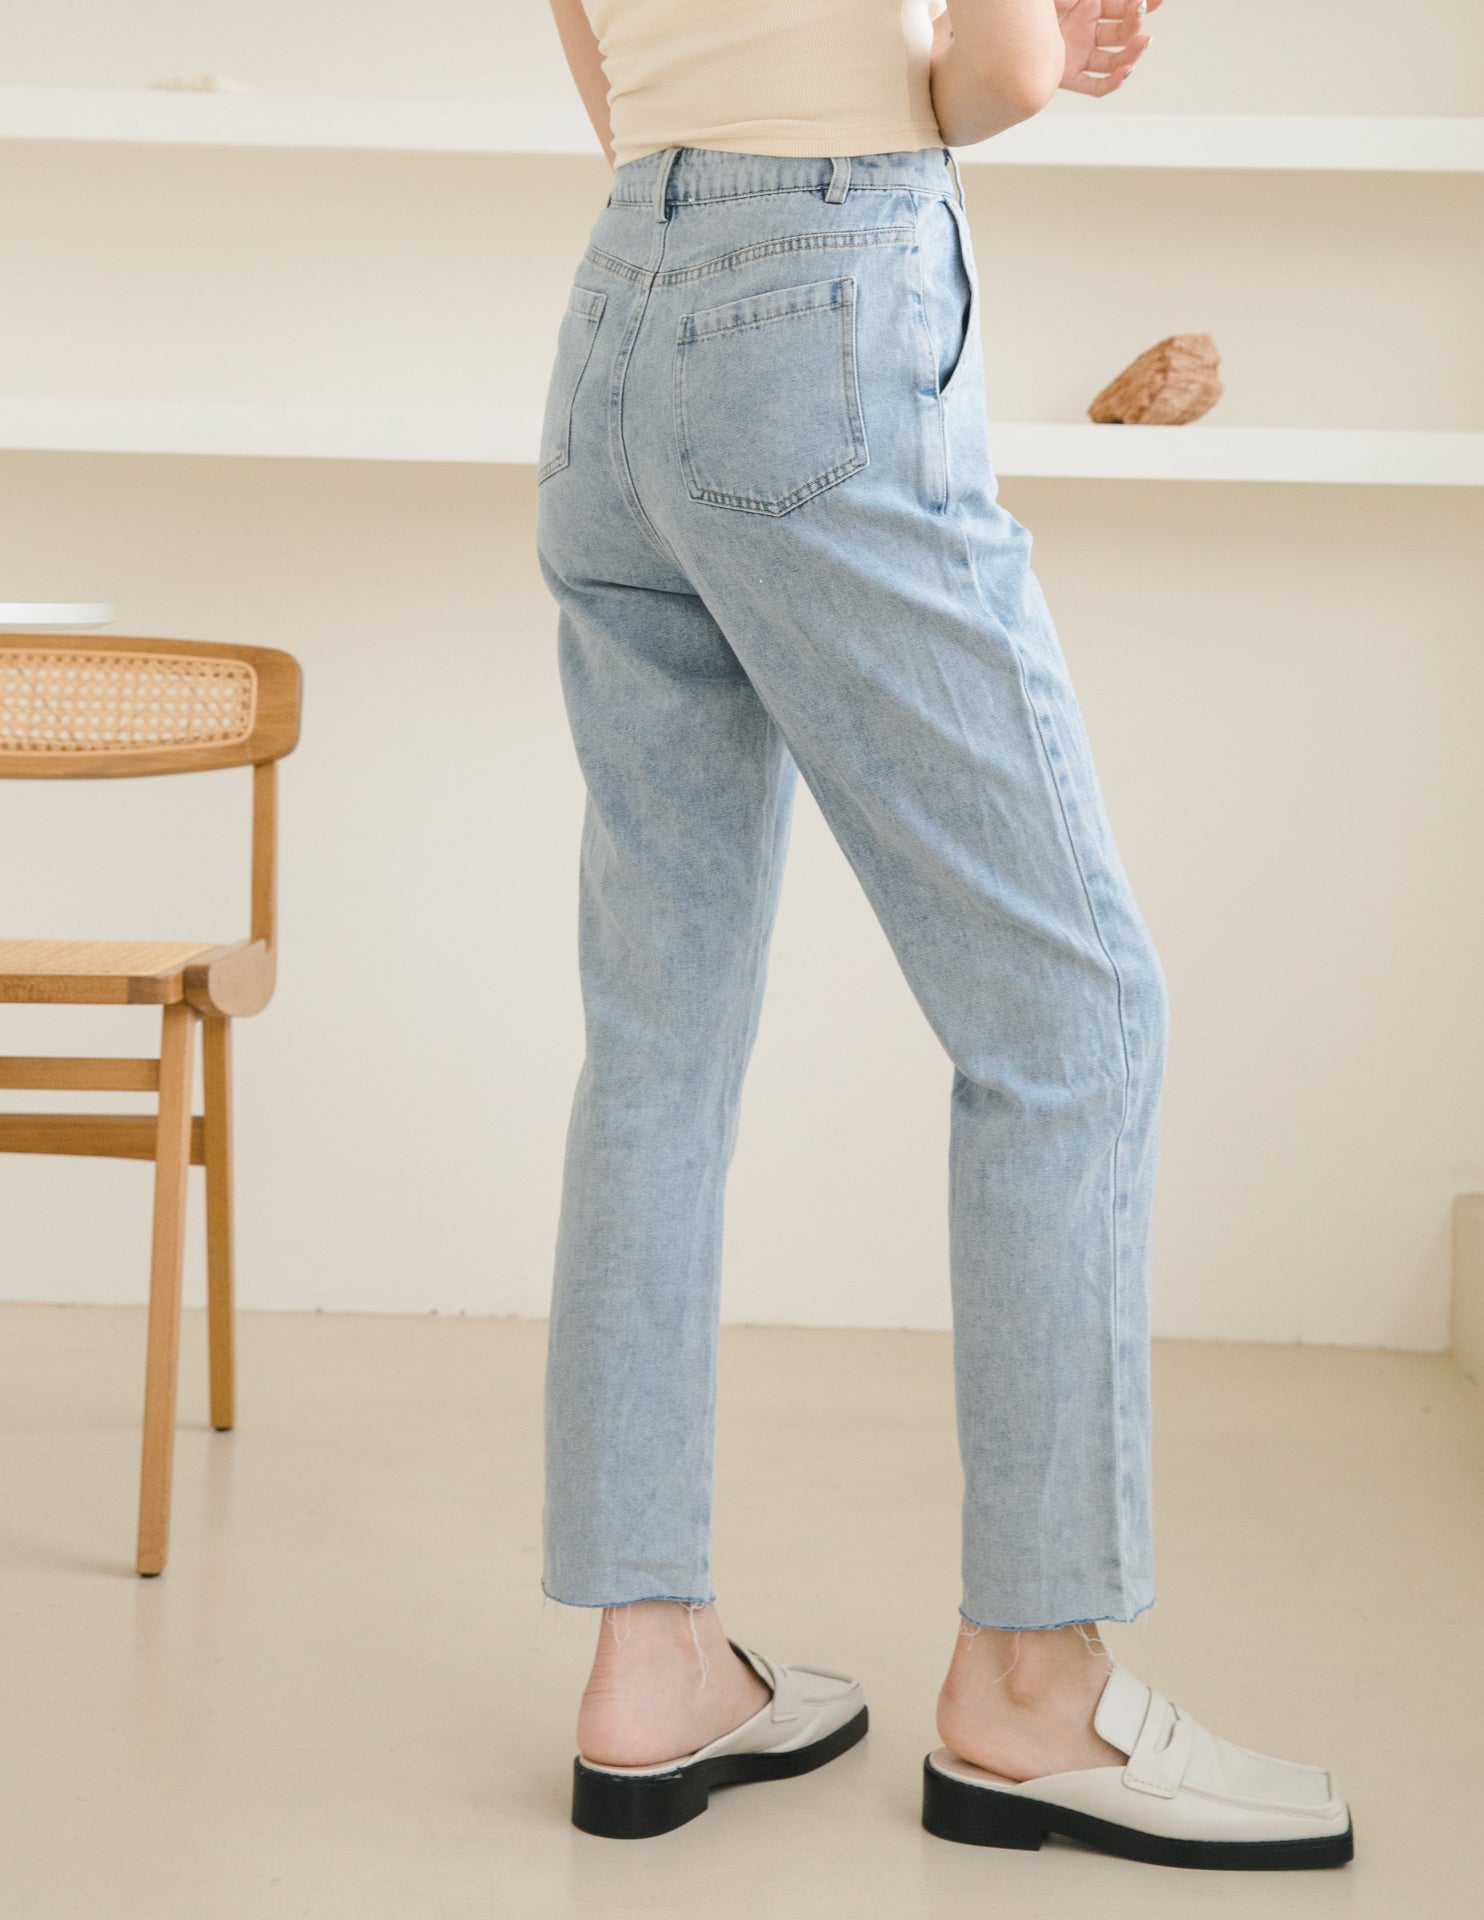 Maxine Jeans in Light Wash